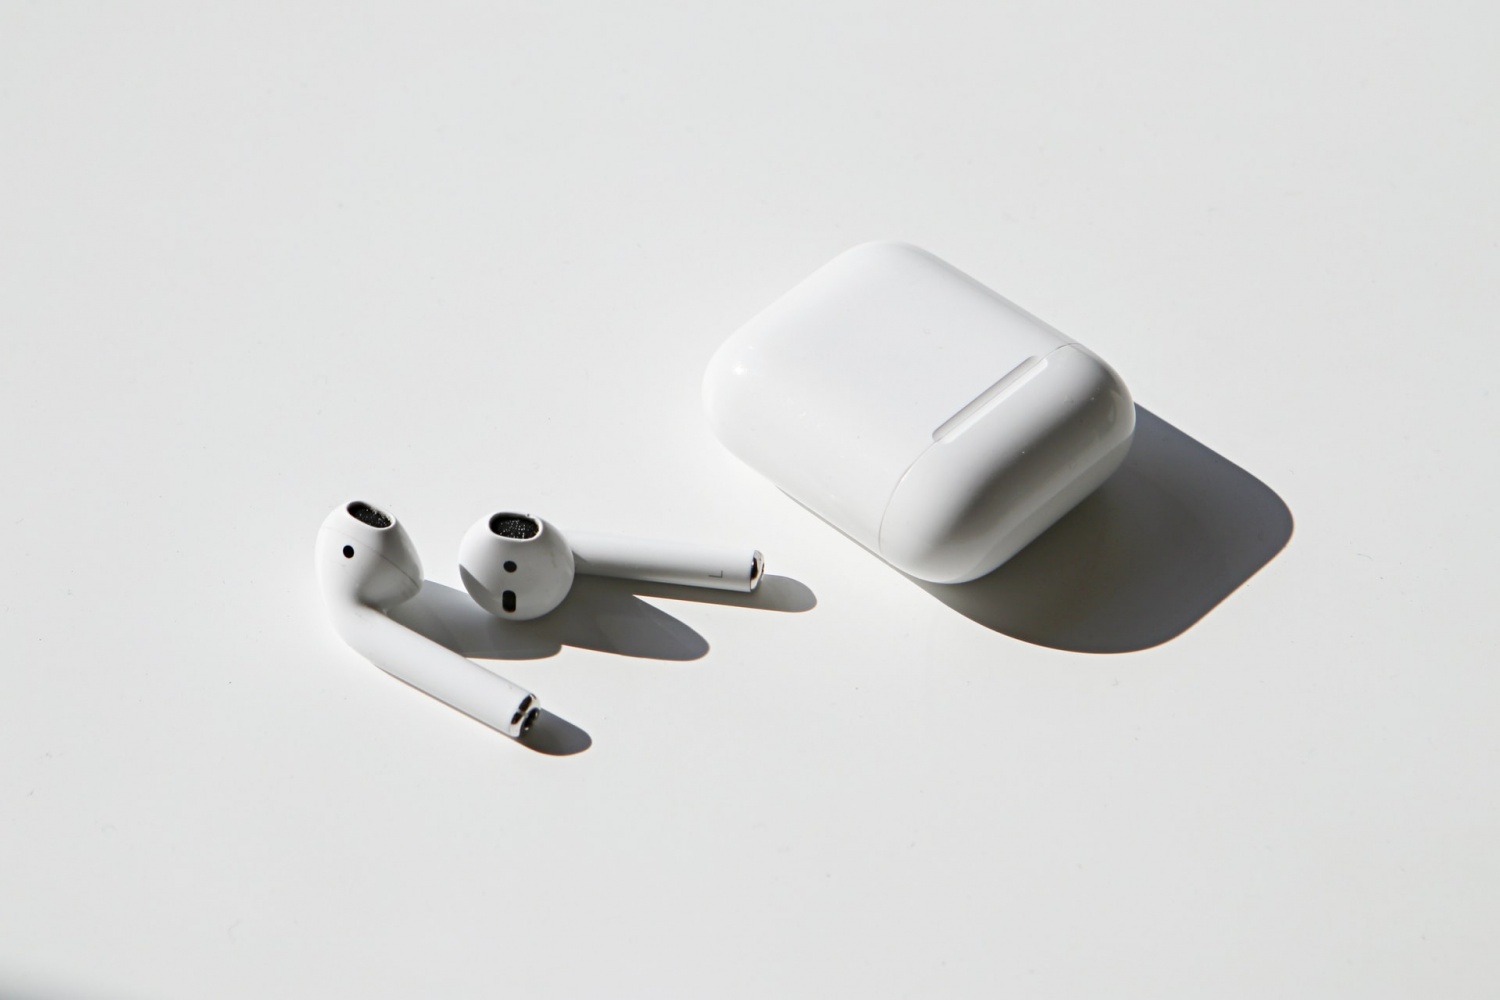 How to Spot Fake AirPods | Fake Buds on Amazon and eBay